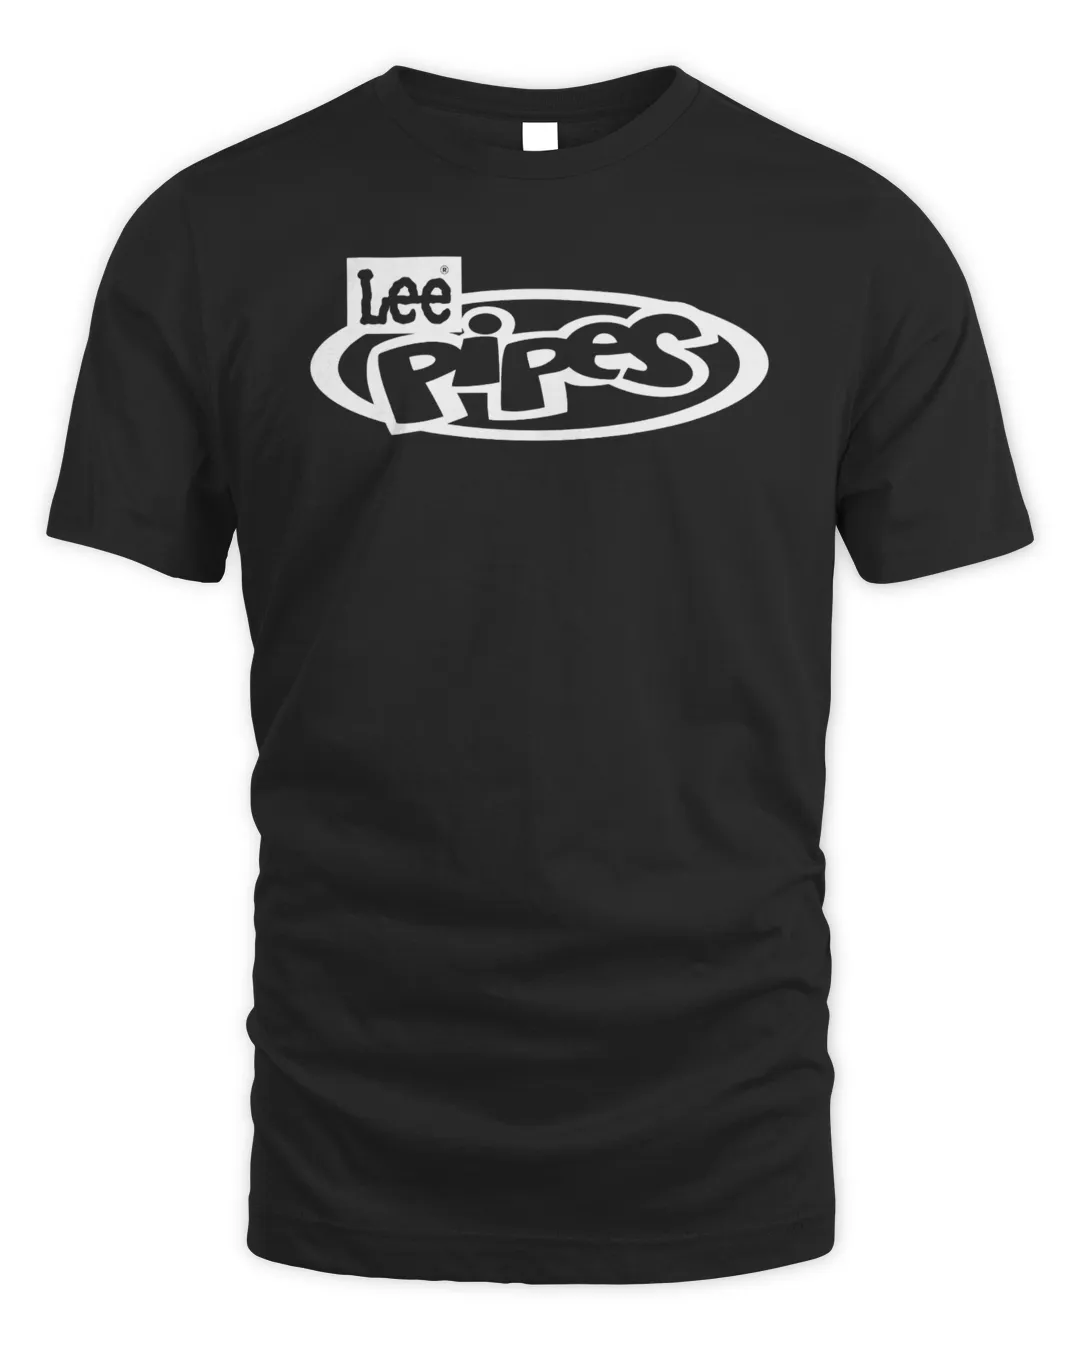 Lee Pipes T-Shirt | Gigasounds